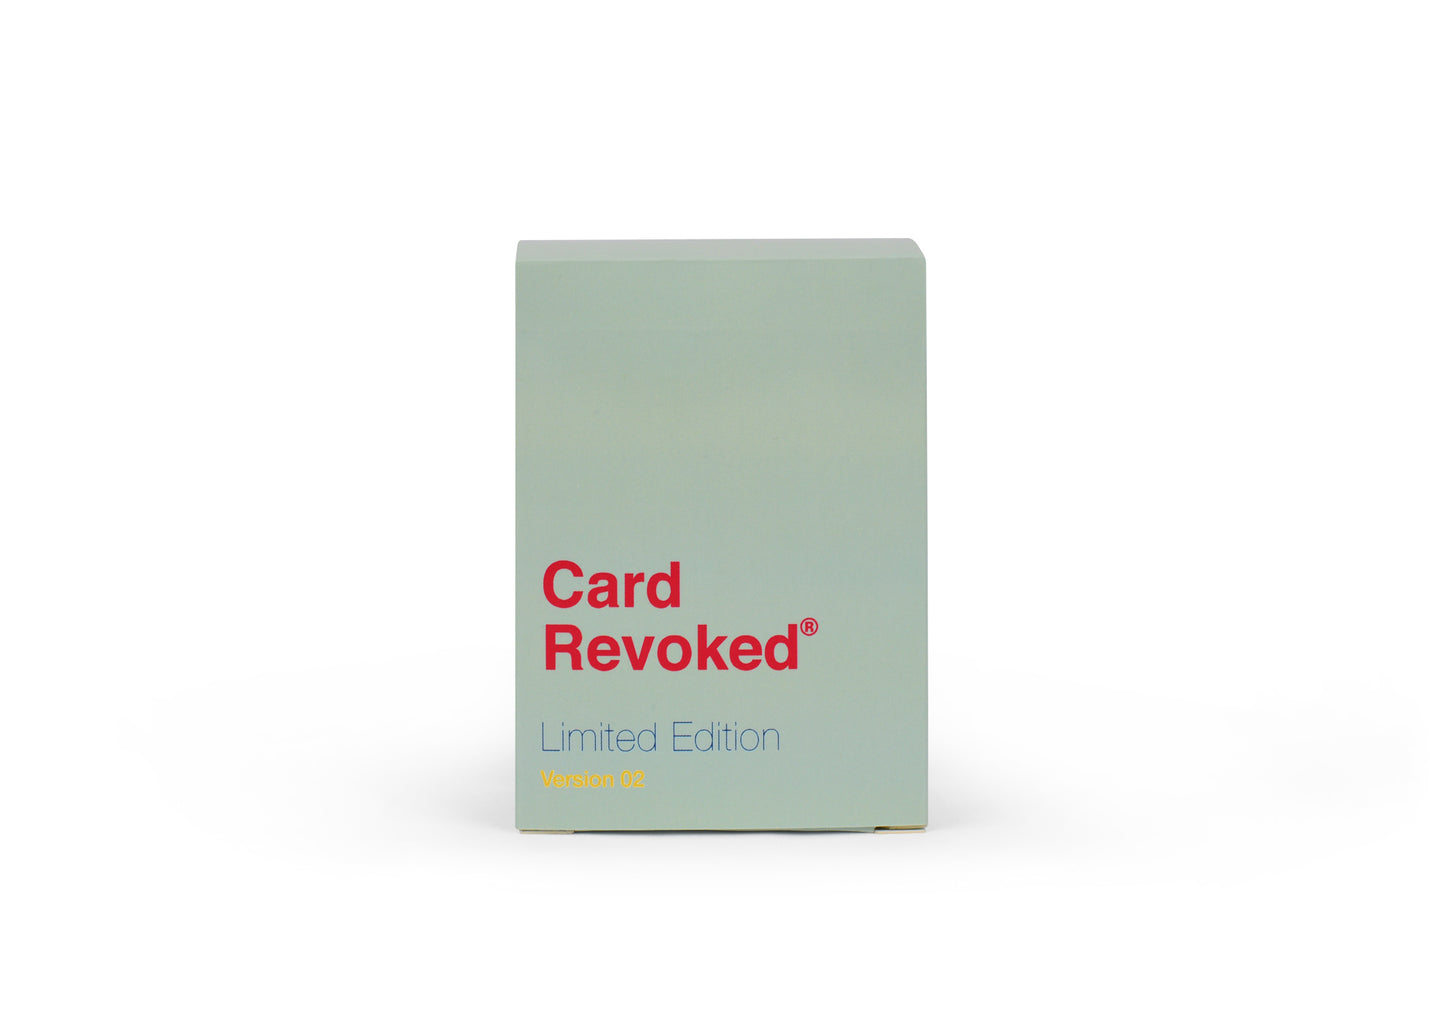 Card Revoked - The Collectible - SOLD OUT